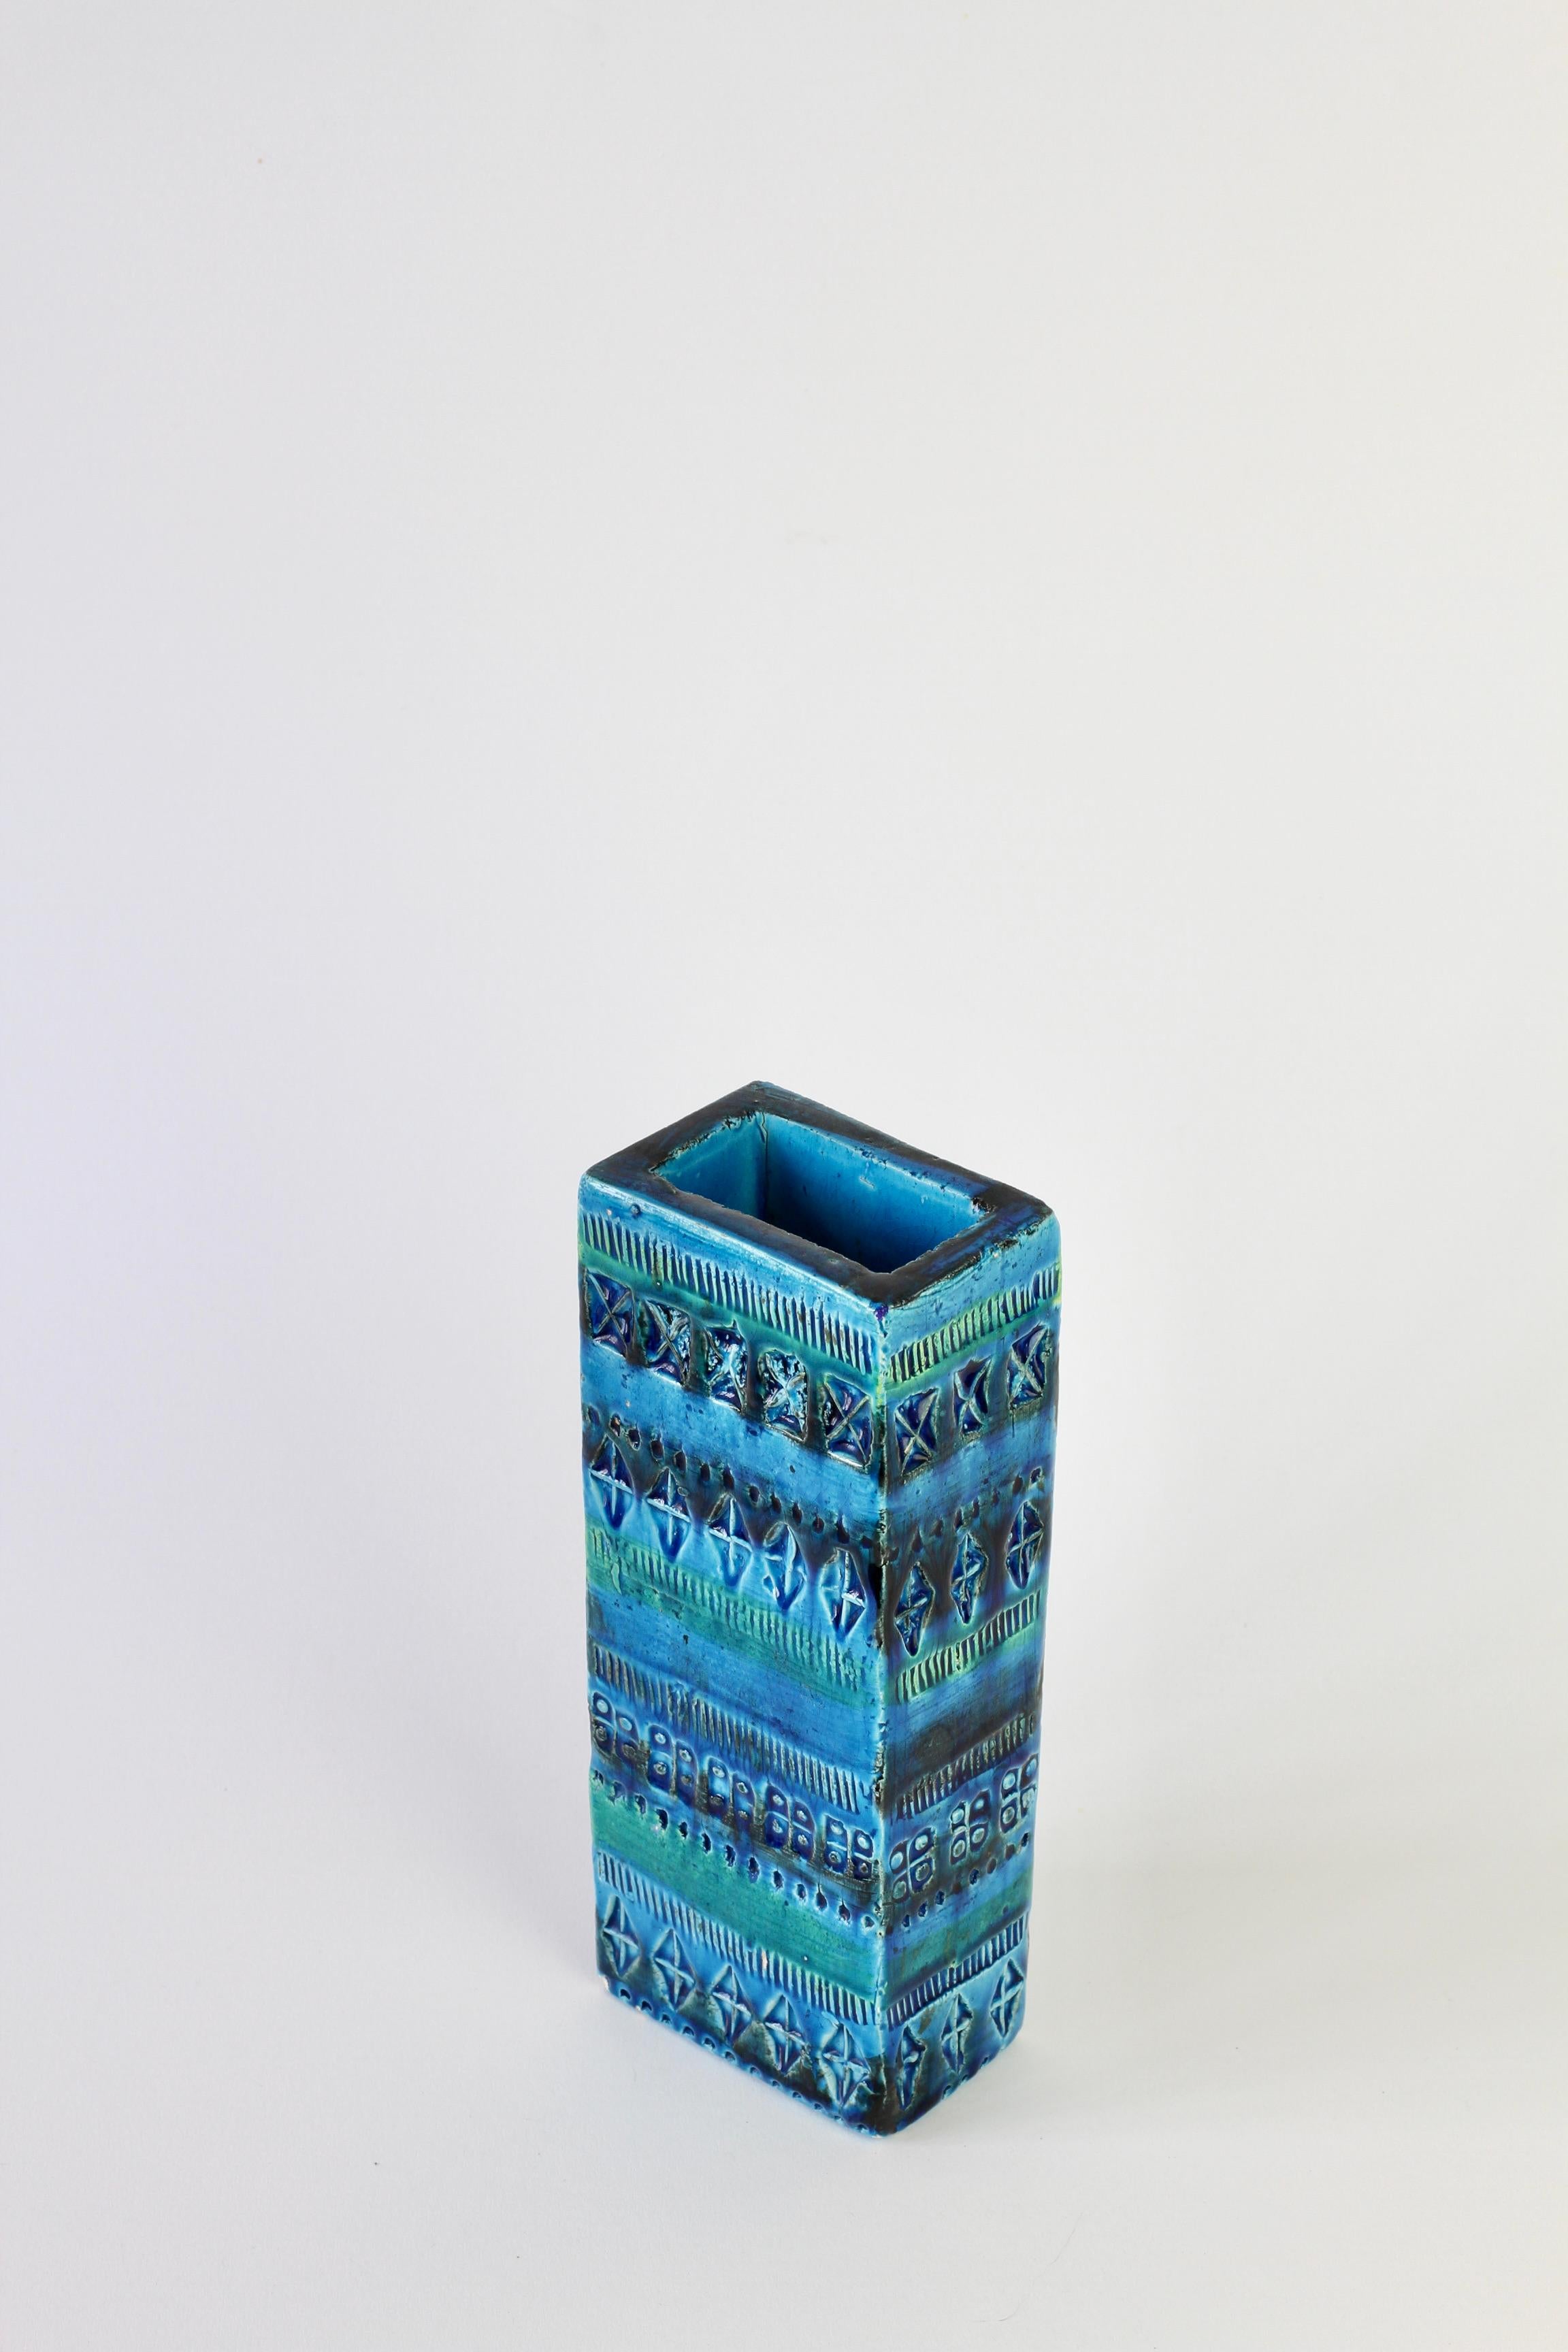 Beautiful tall embossed vase in vibrant 'Rhimini' blue and turquoise by Aldo Londi for Bitossi, circa 1968. A great. piece of vintage, mid-century handmade Italian pottery. 

Shape number 727/21.

We have more rare Bitossi vases, vessels &